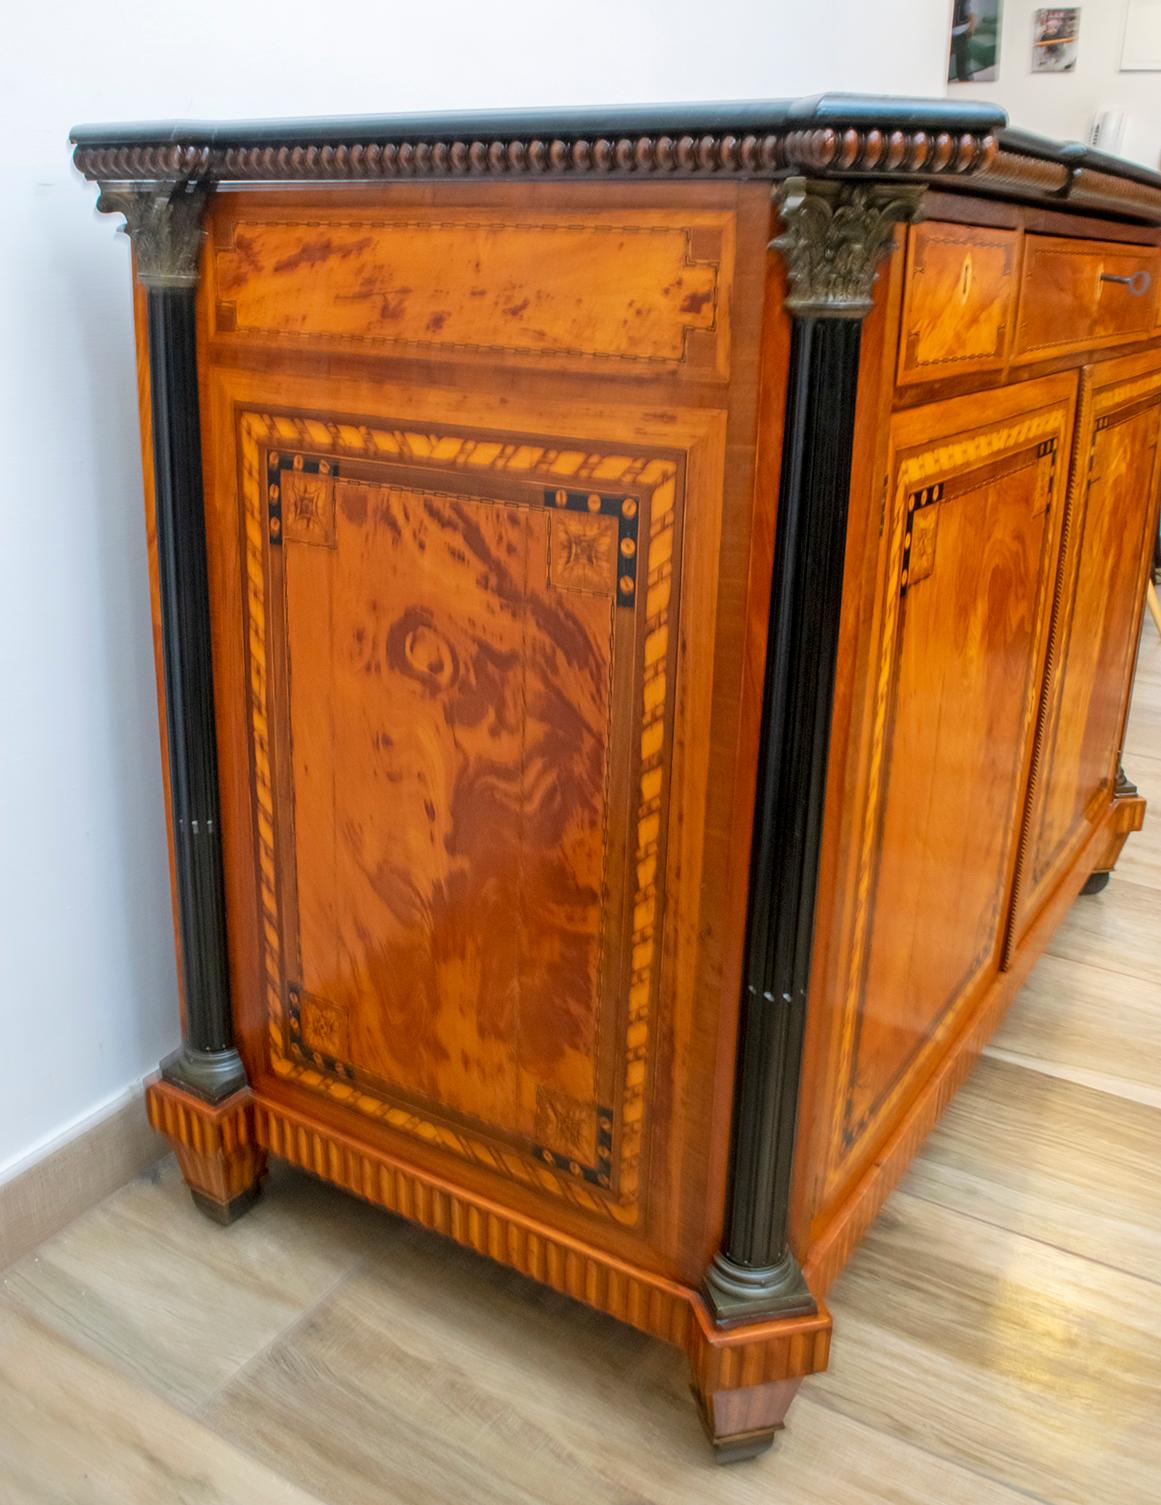 Napoleon III French Sideboard Inlaid with Geometric Floral Motifs, 1850 For Sale 4